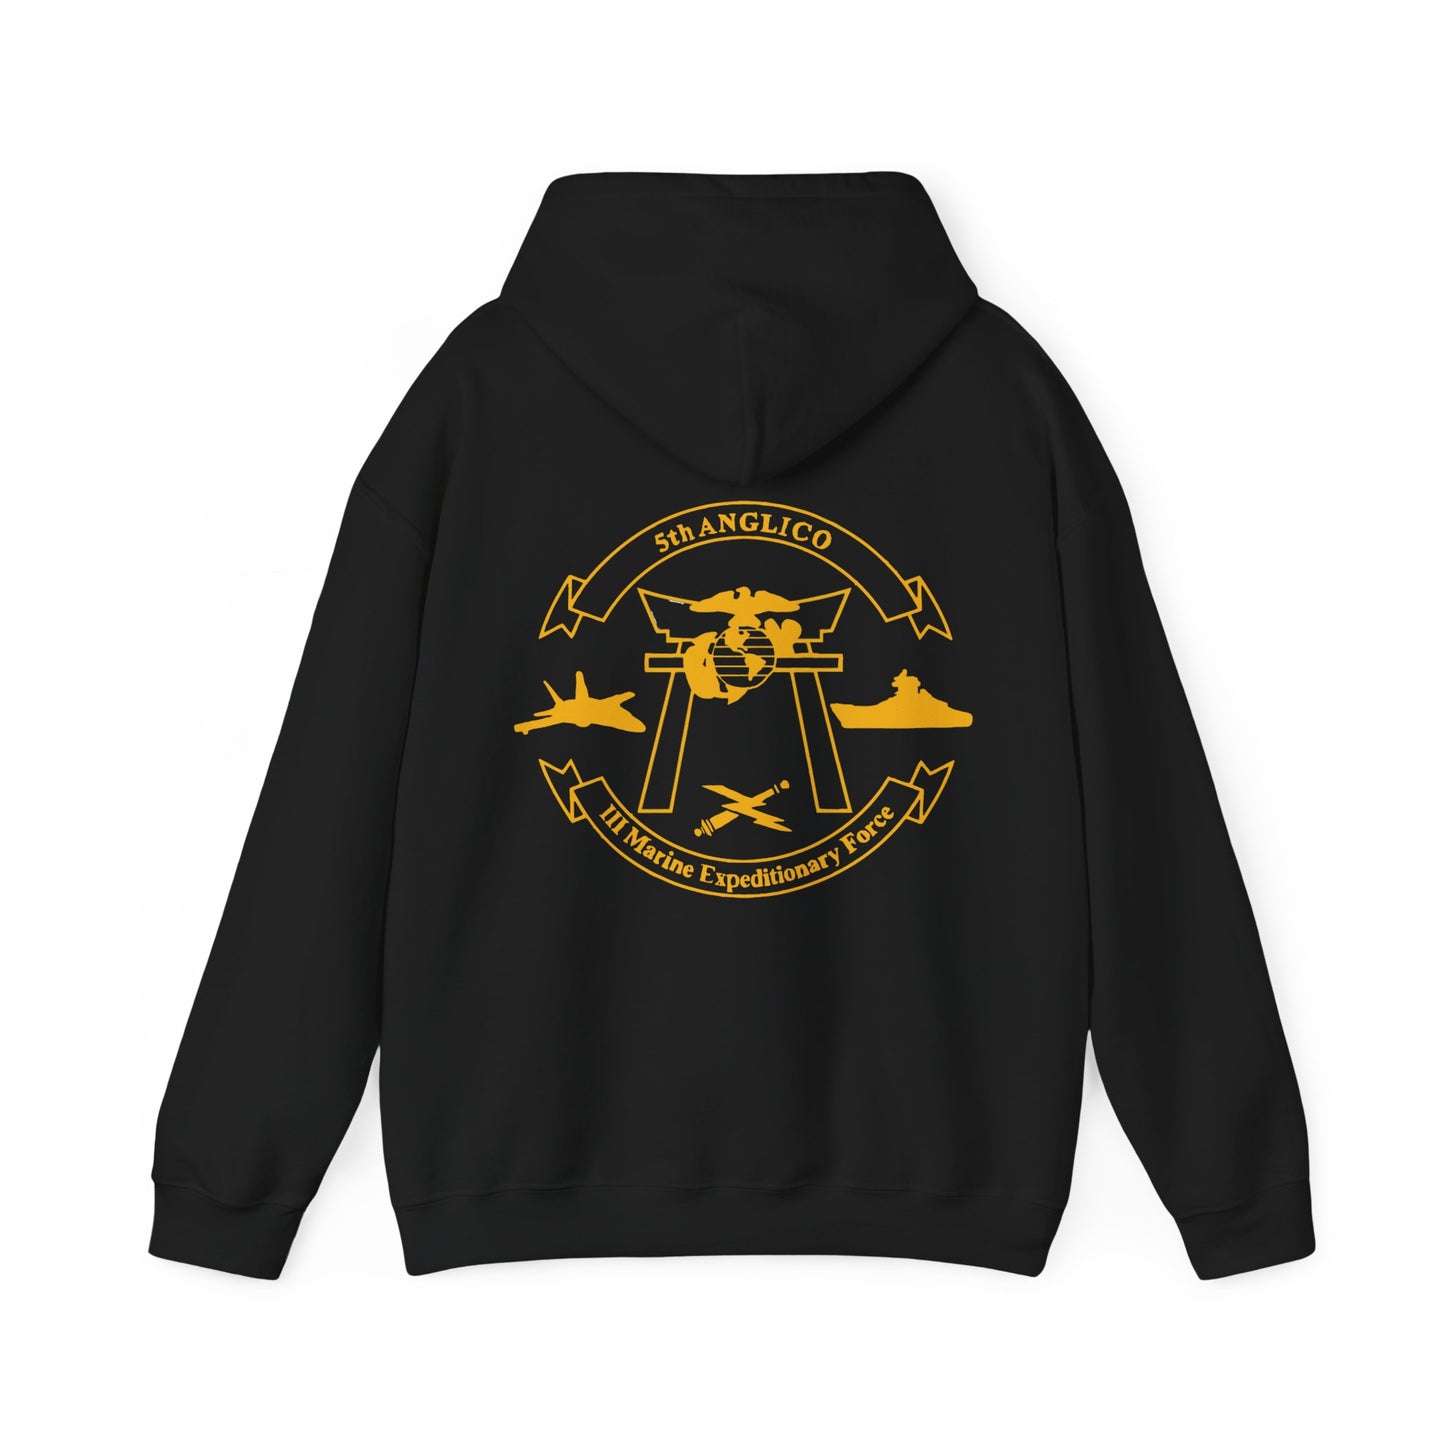 5th ANGLICO Hoodie